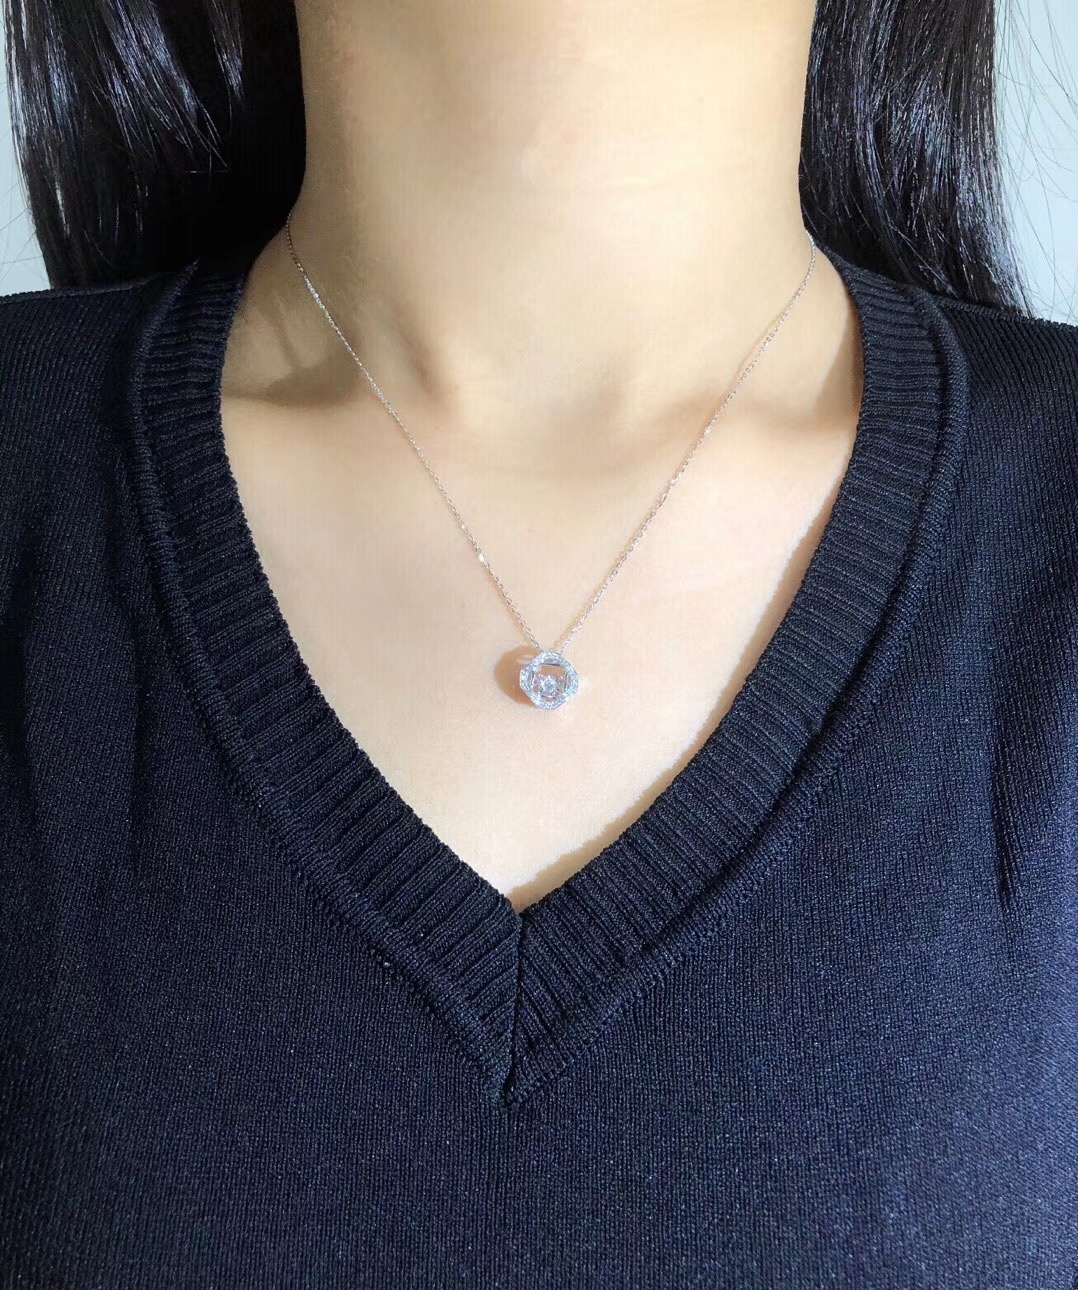 A00009 Diamond Necklace in 18k White Gold/18k Gold